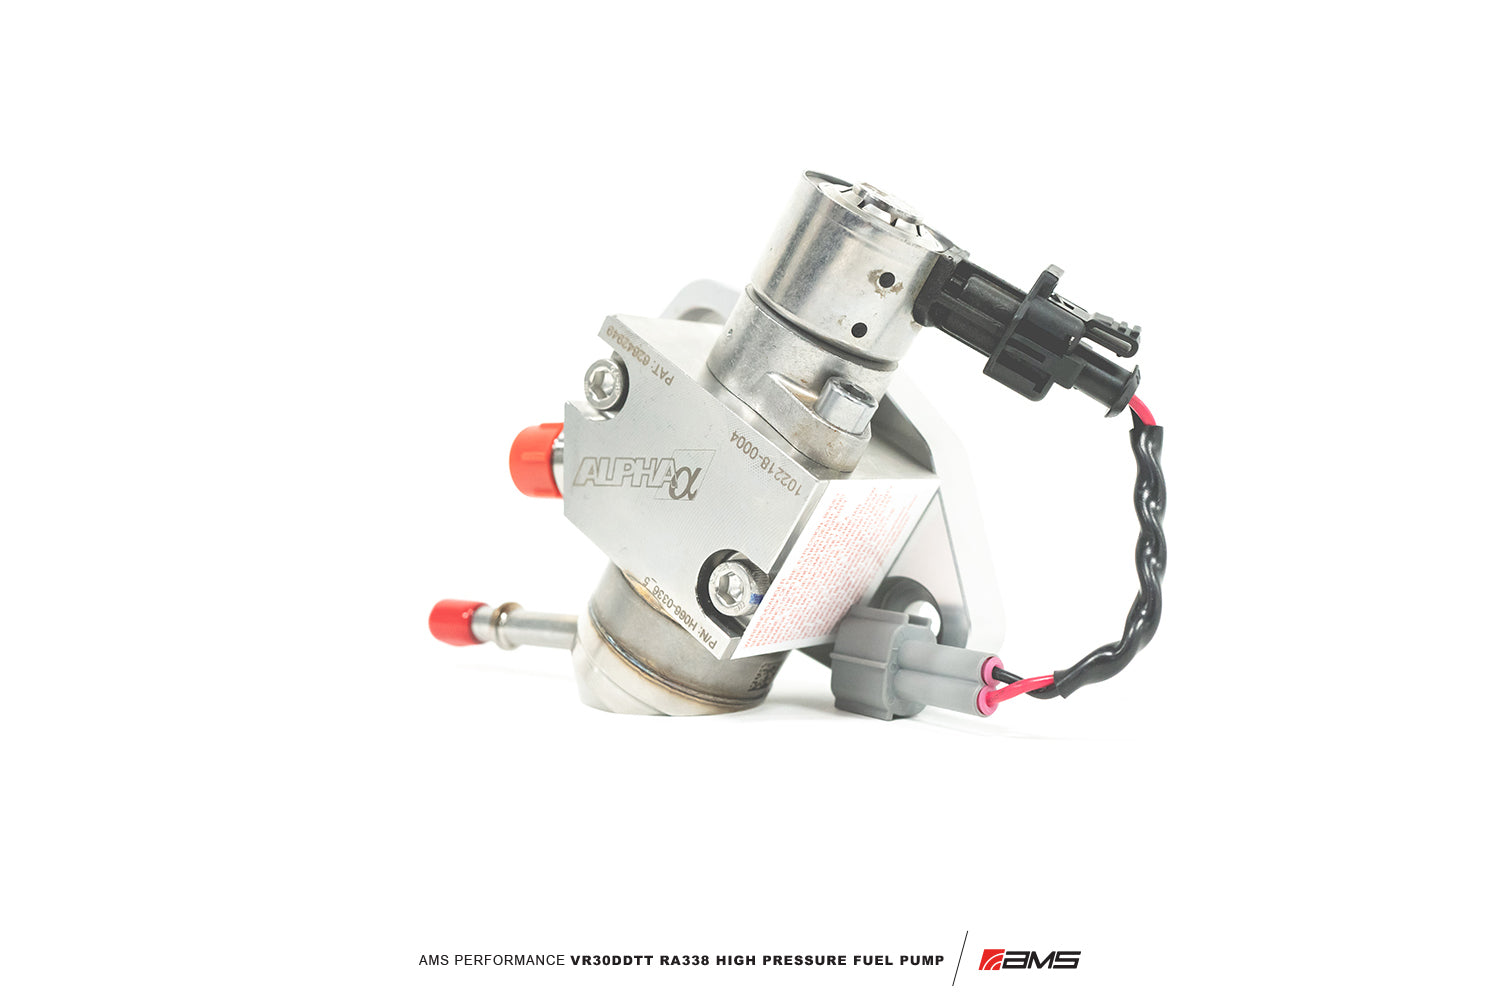 AMS PERFORMANCE ALP.28.07.0001-1 STAGE 1 HIGH PRESSURE FUEL PUMP For 2017+ INFINITI Q60 with 3.0L Twin Turbo VR30